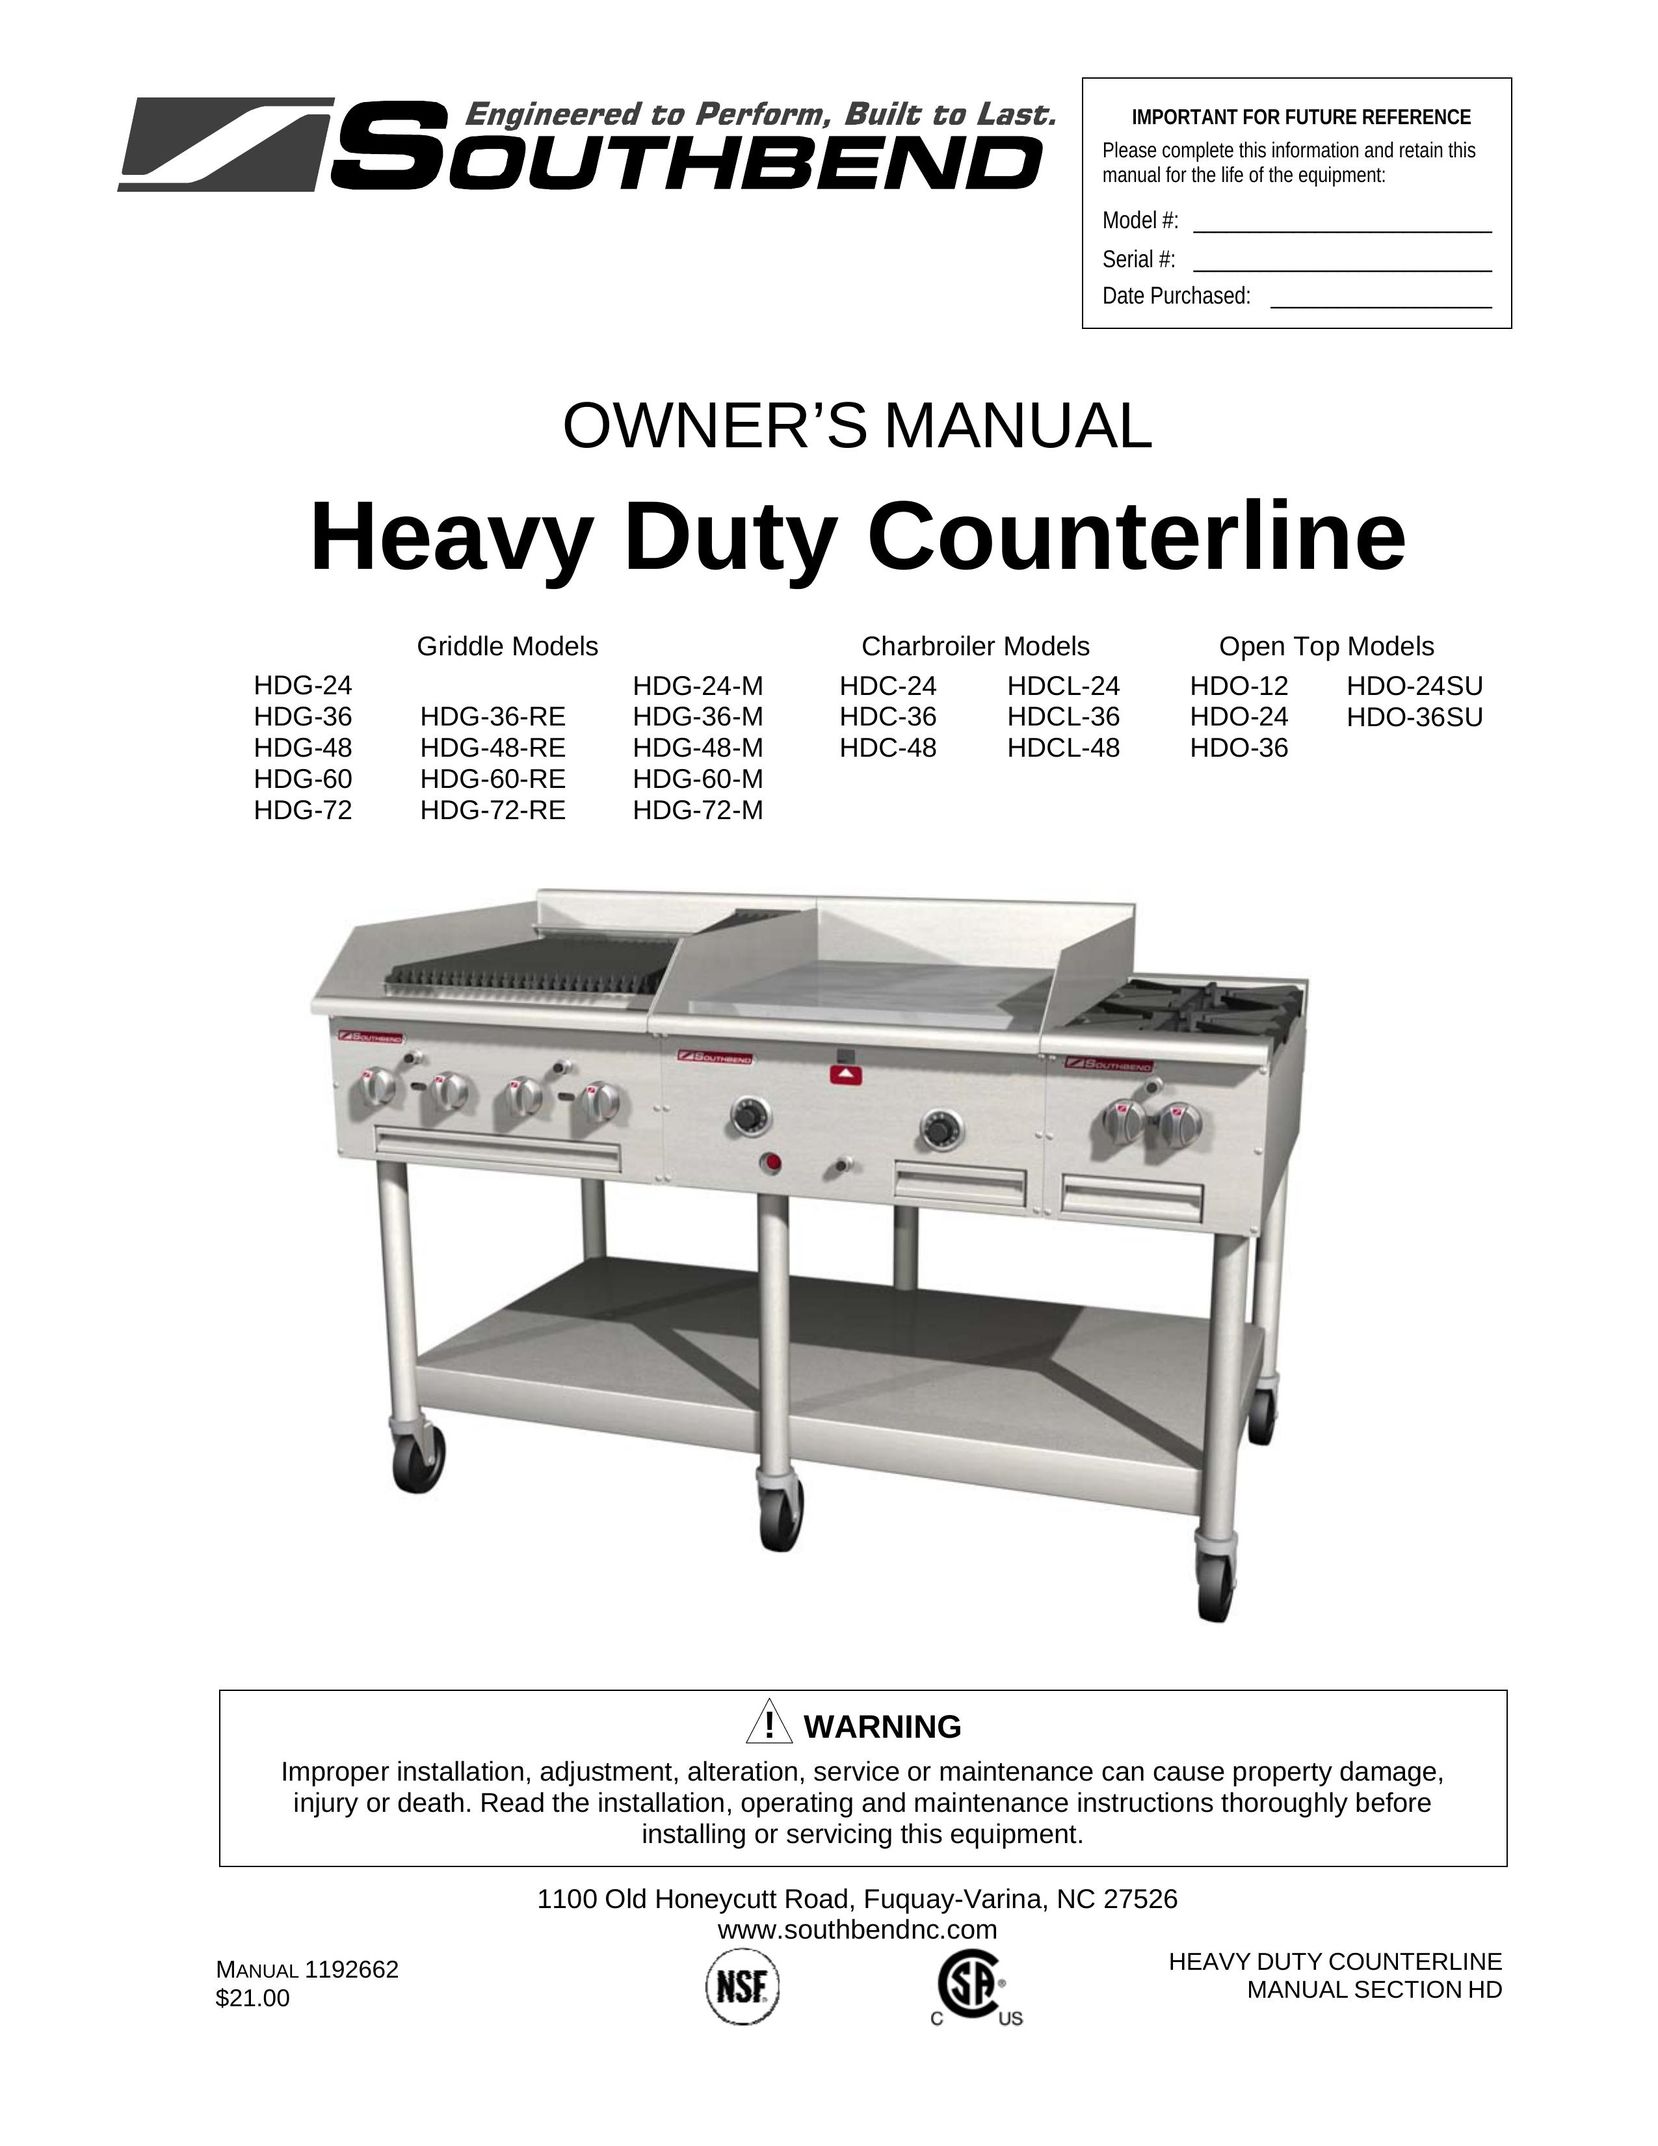 Southbend HDC-24 Griddle User Manual